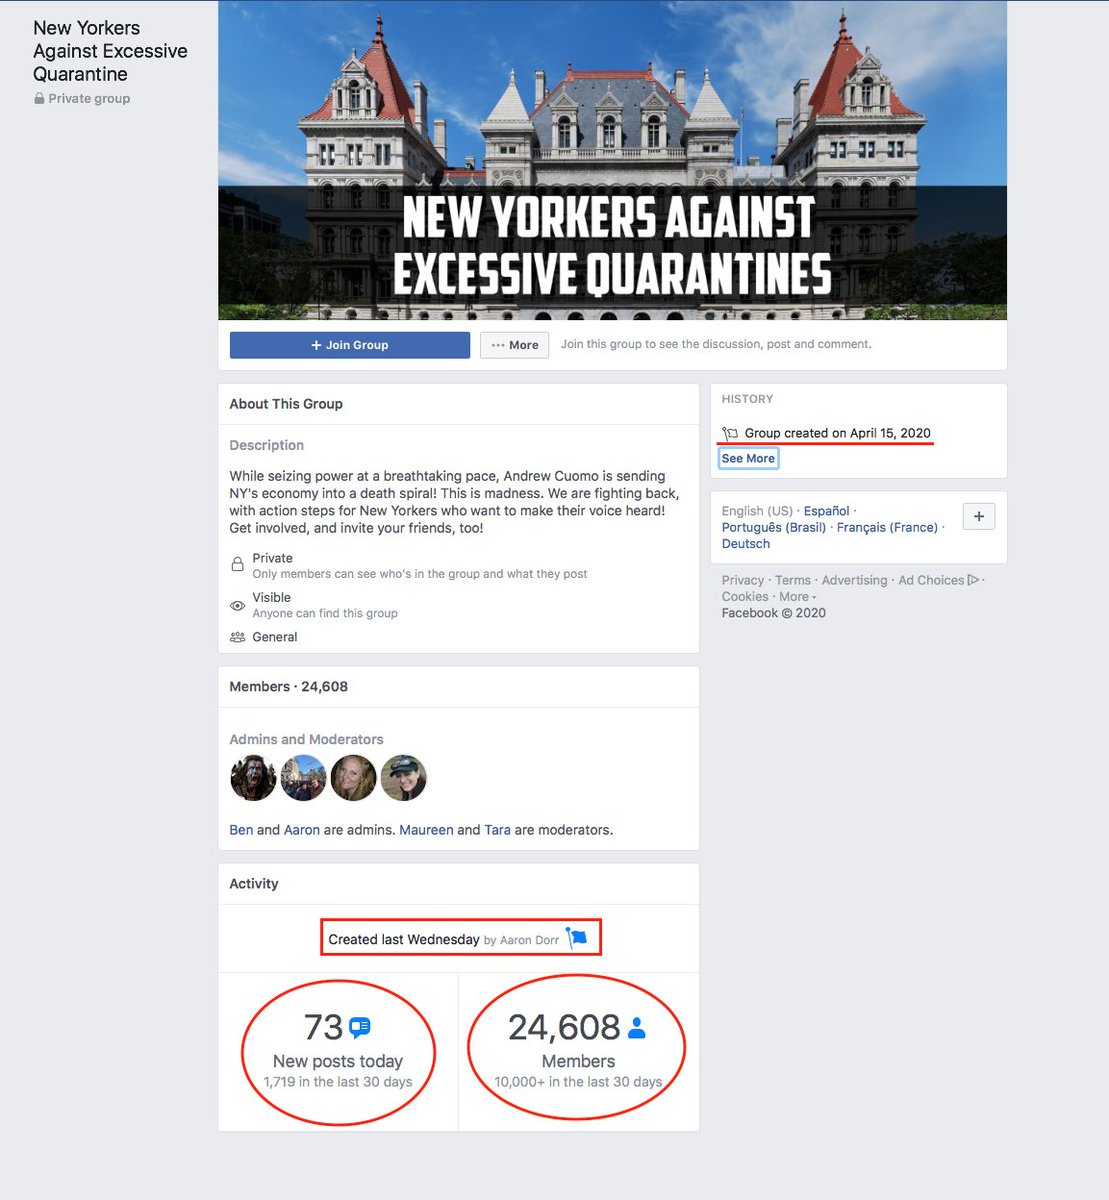 'New Yorkers Against Excessive Quarantine' Facebook Group created by Aaron Dorr, April 15, 2020. There is no linked website on the New York group page. I have archived all the Facebook groups and their linked websites